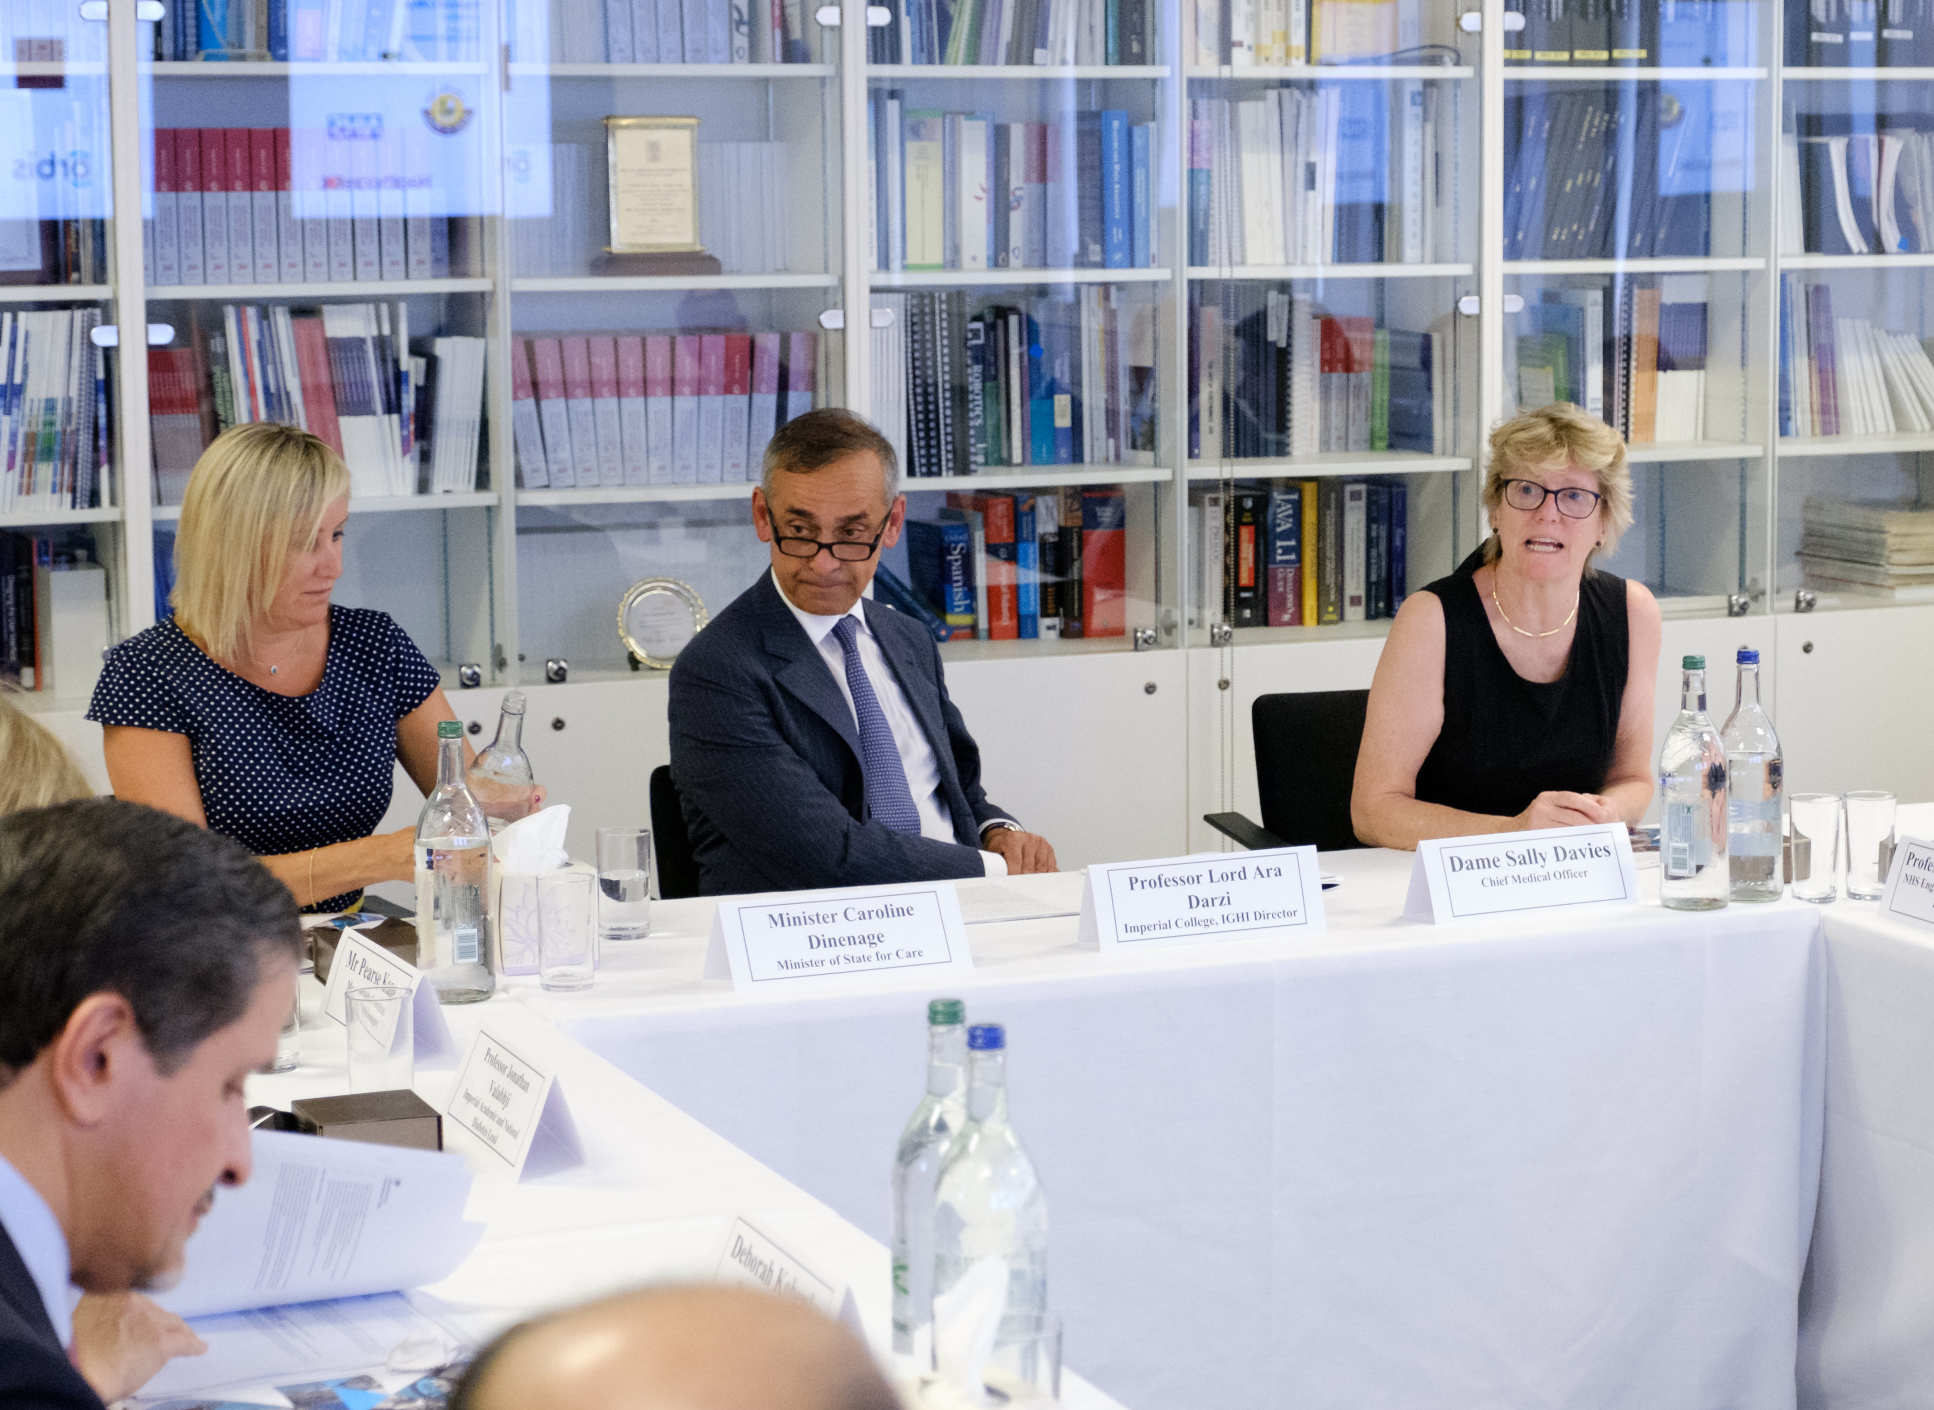 Chief Medical Officer Dame Sally Davies joined the discussions